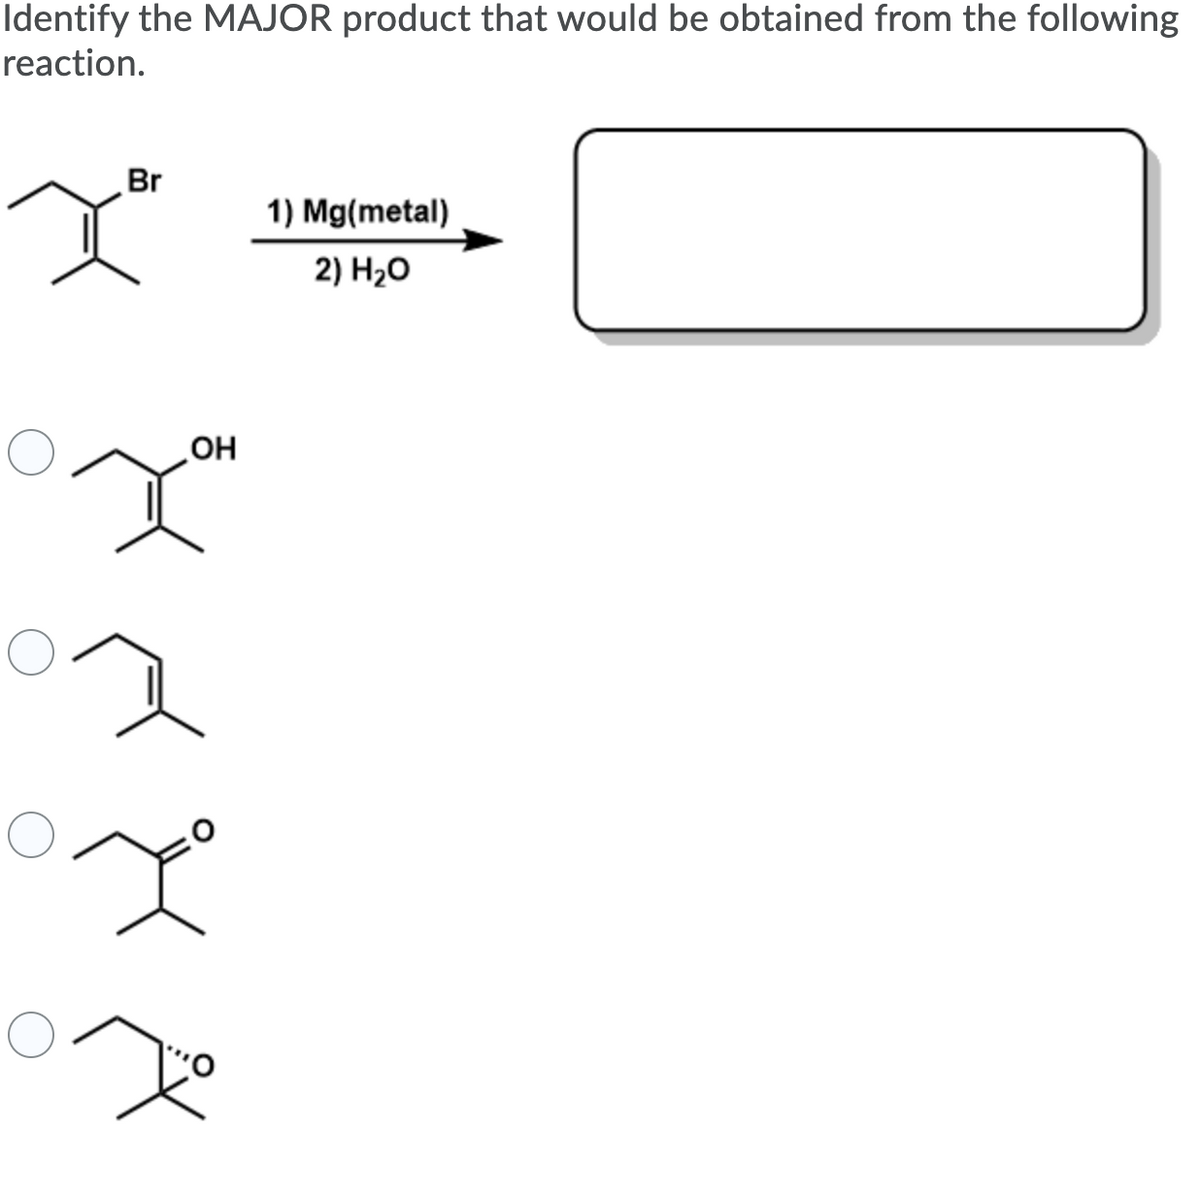 Identify the MAJOR product that would be obtained from the following
reaction.
Br
1) Mg(metal)
2) Н,о
OH
